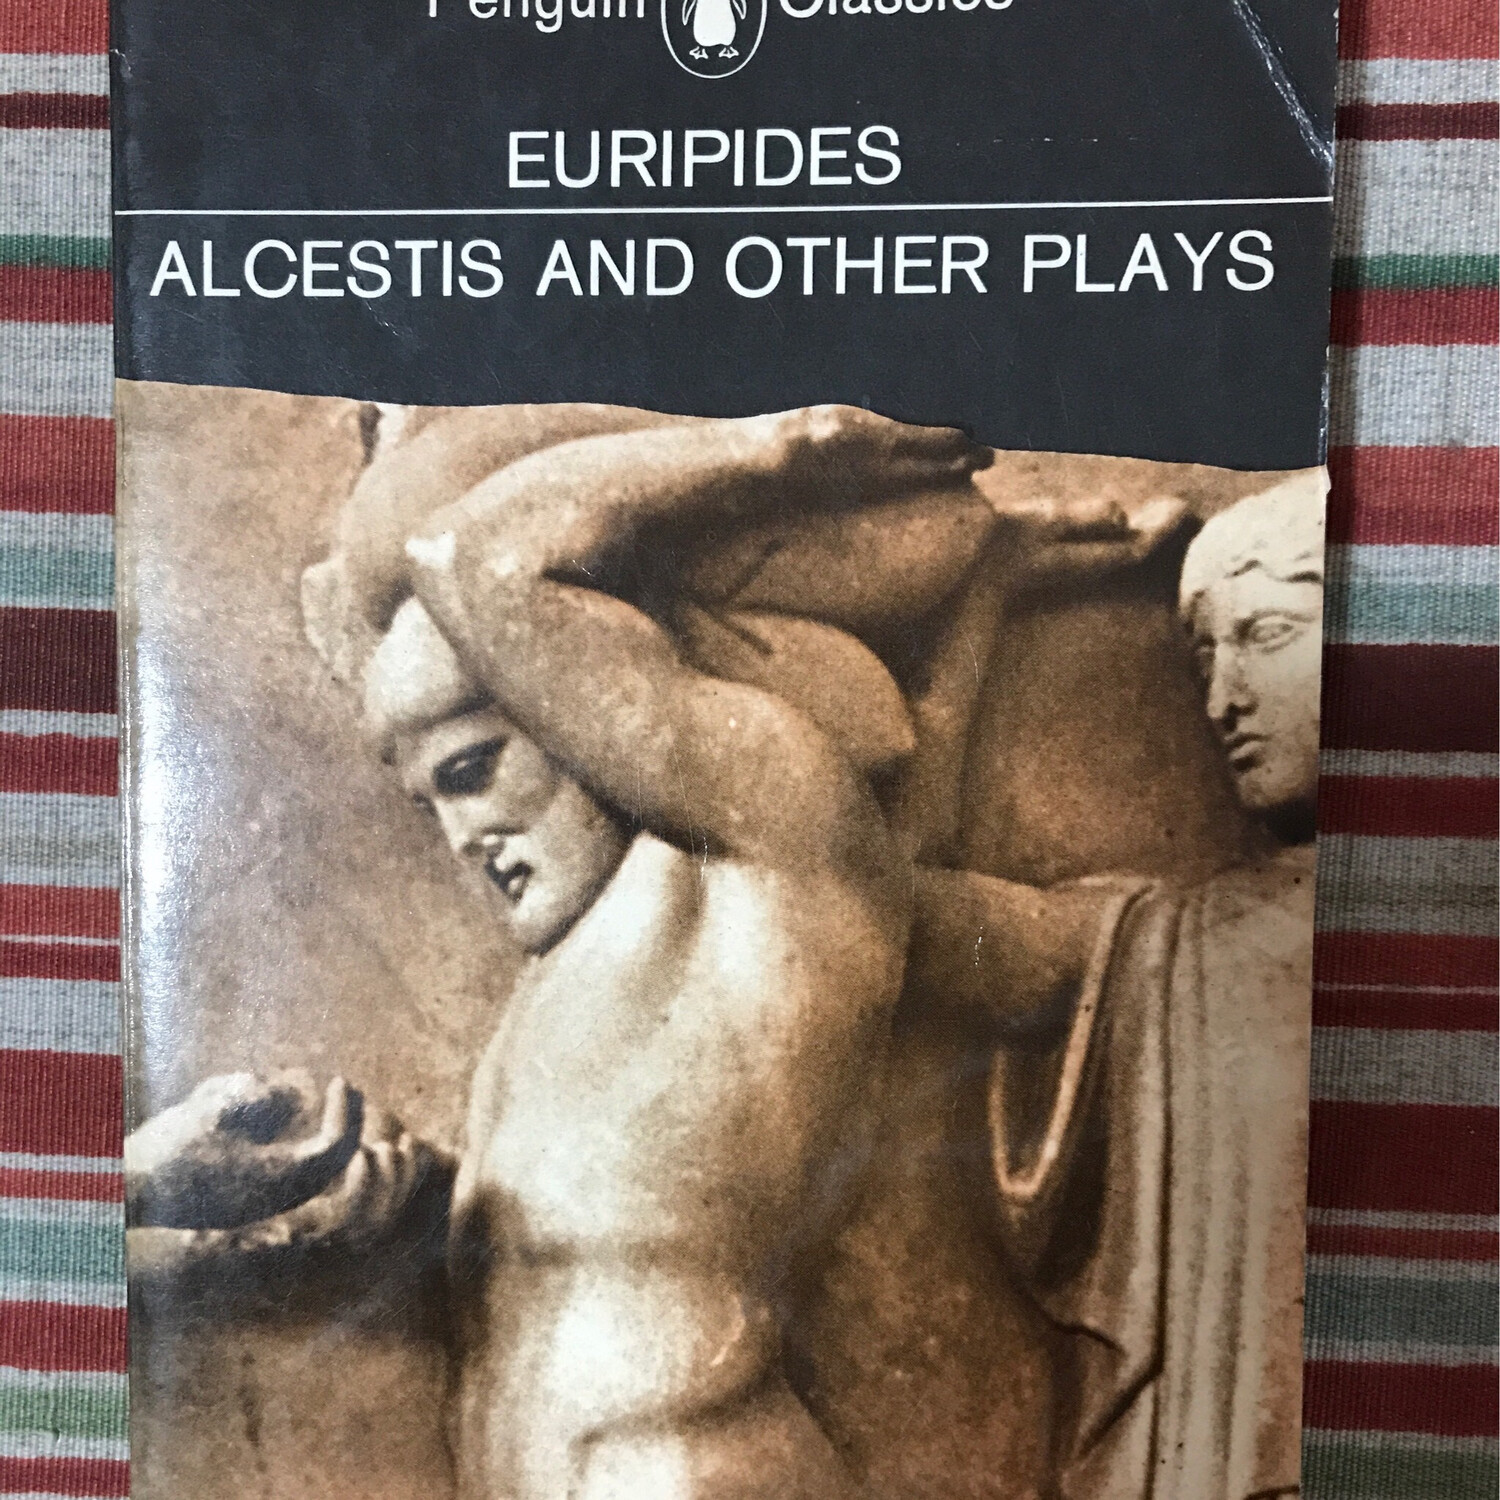 Alcestis And Other Plays, Euripides